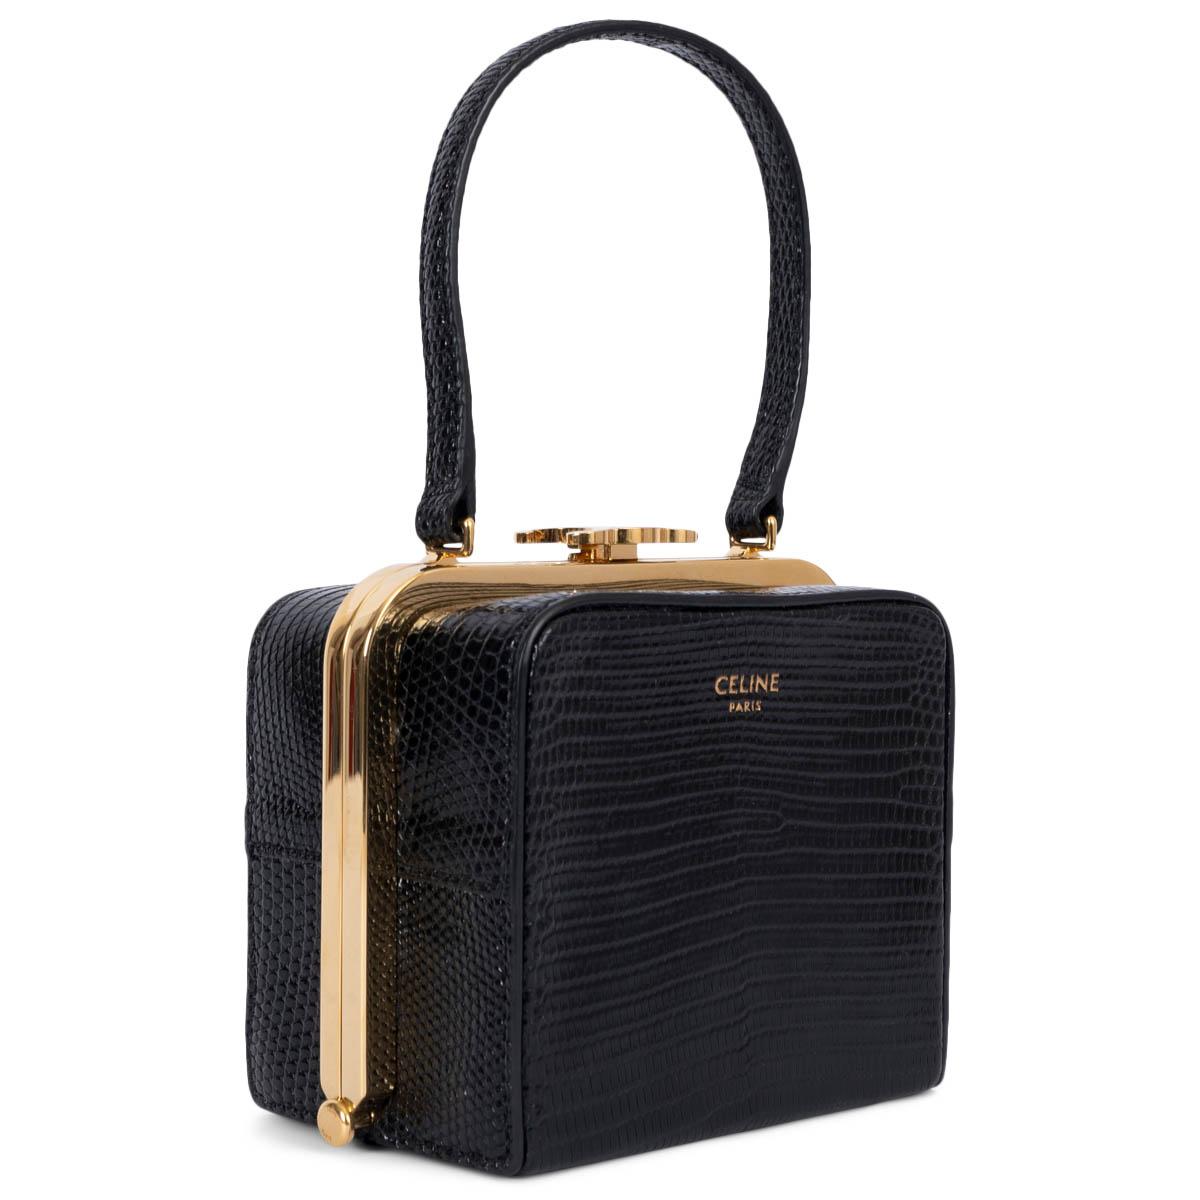 100% authentic Celine Lana Minaudière evening bag in black lizard (varanus salvator) featuring gold-tone finish hardware with Triomphe closure and black lambskin lining. Has been carried once or twice and is in virtually new condition. Comes with